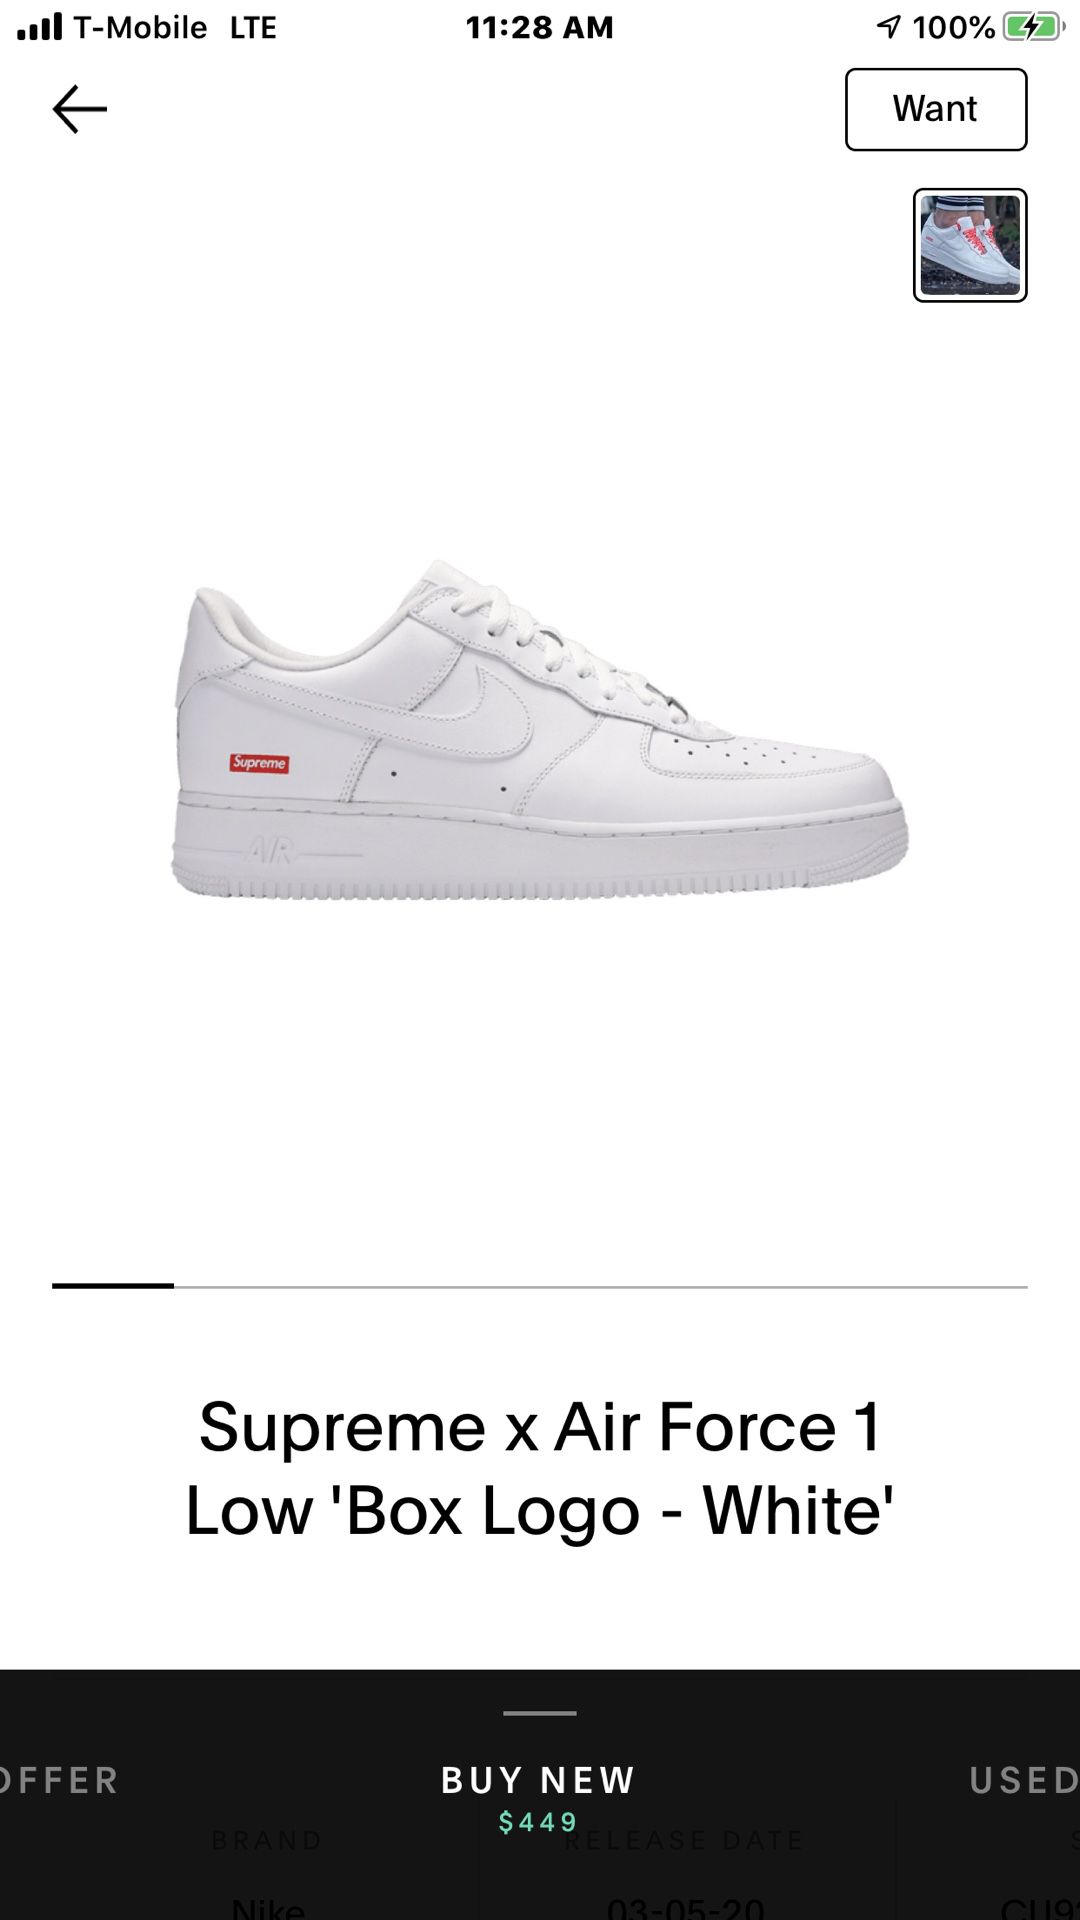 Supreme Air Force 1 deadstock